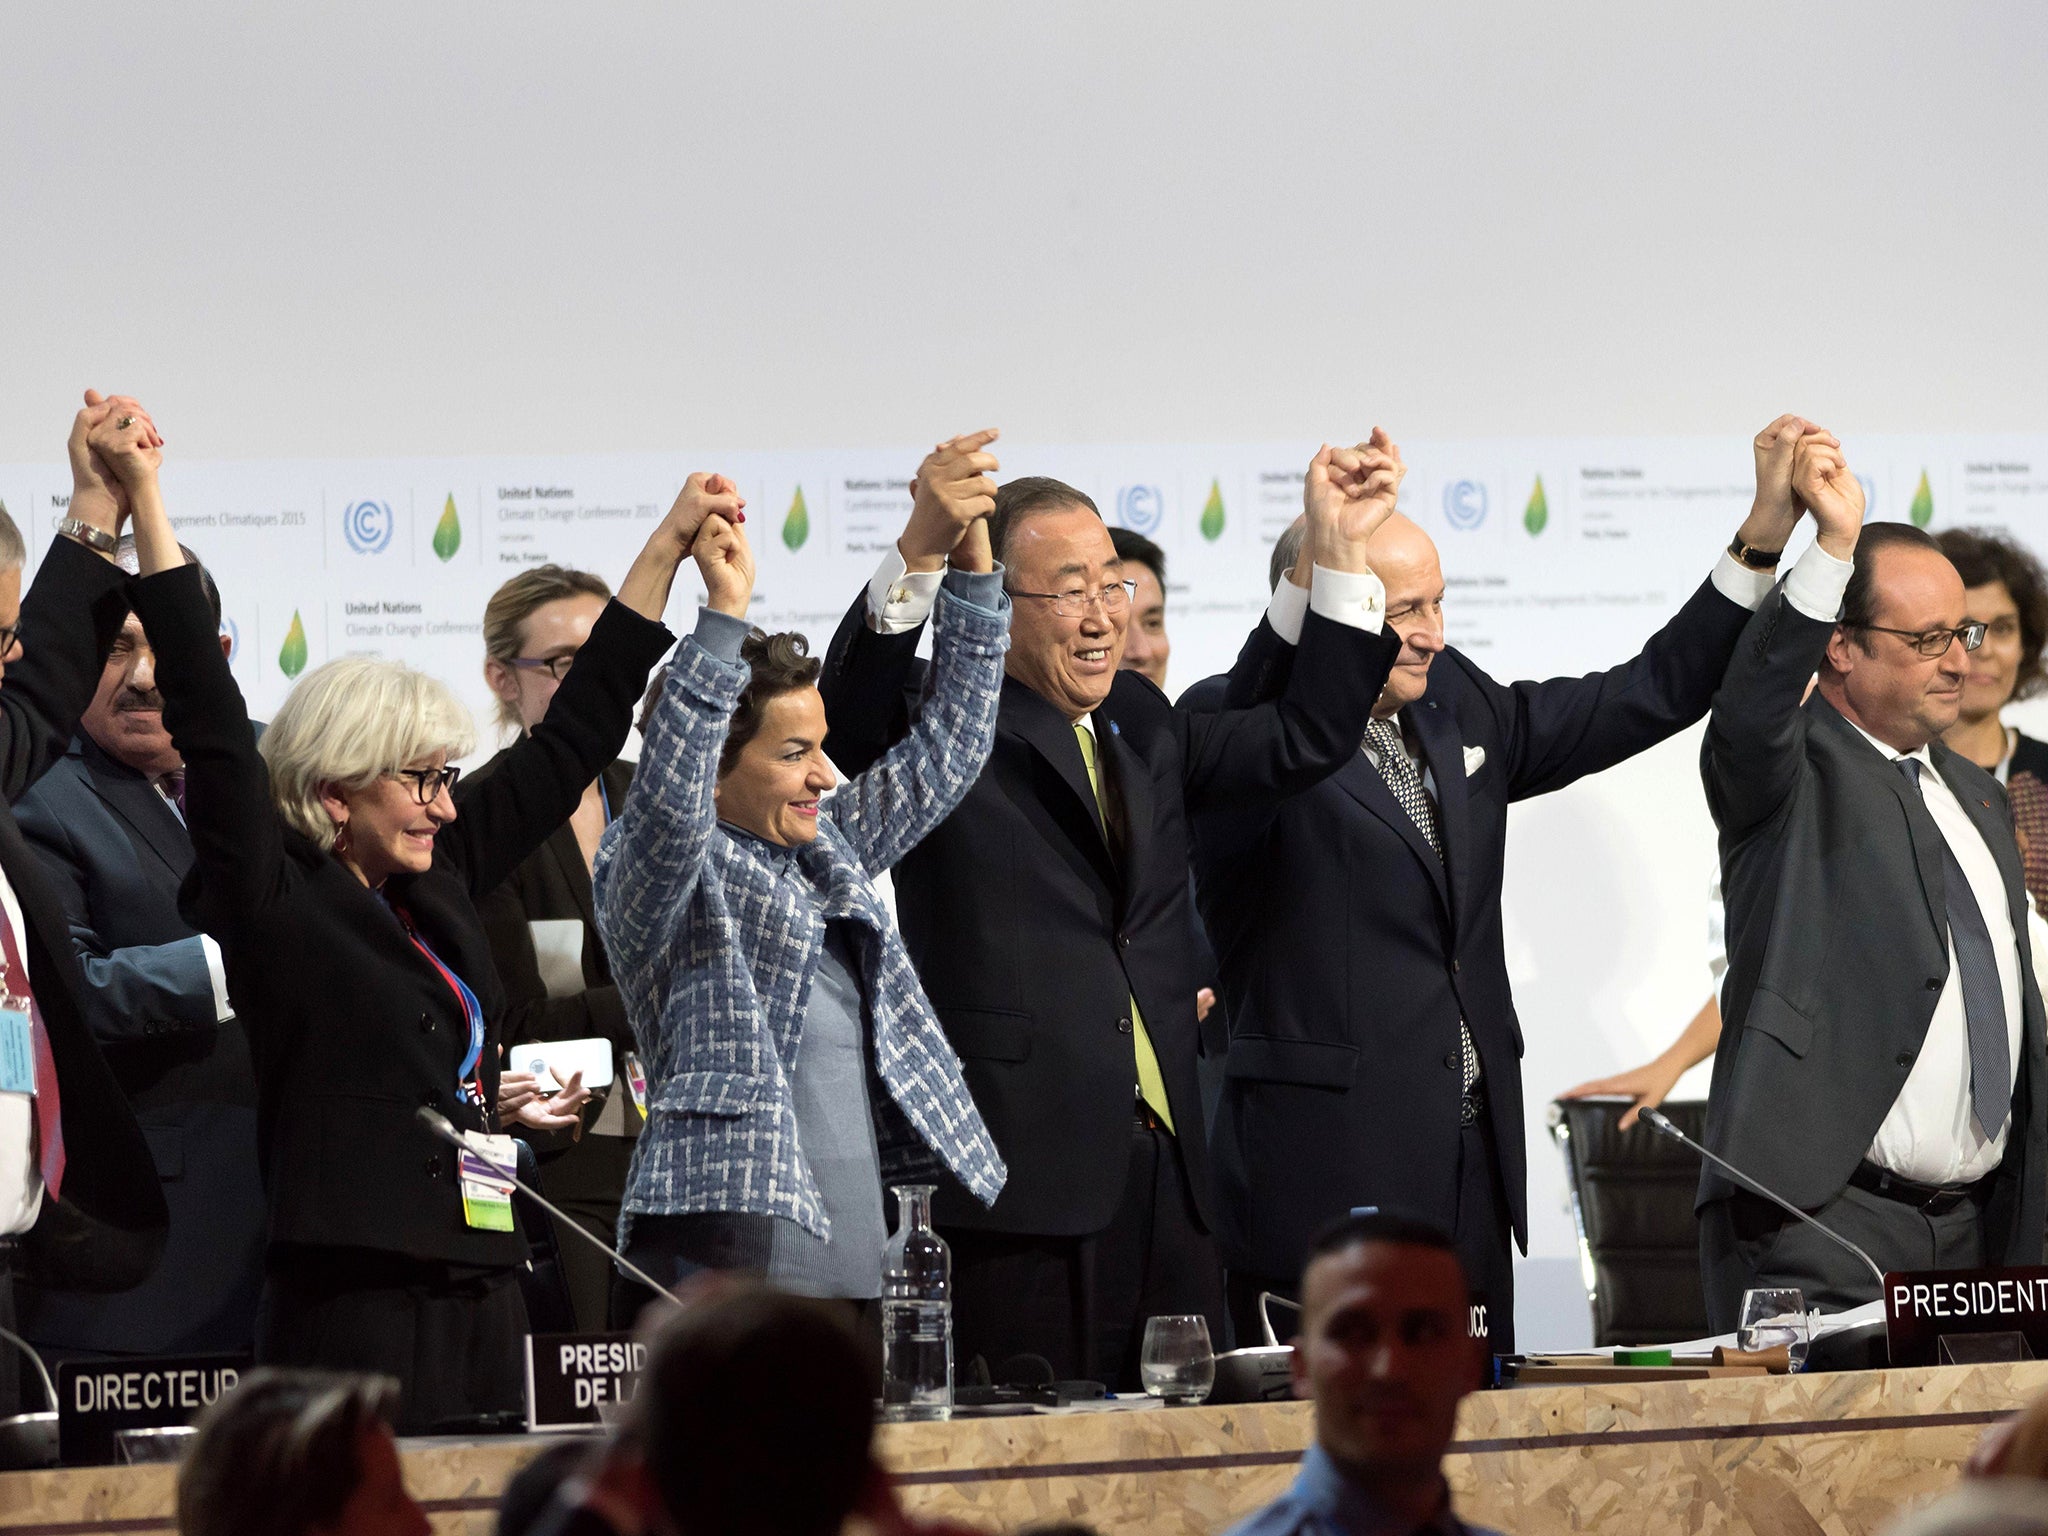 Politicians and officials who negotiated the Paris Agreement on climate change jumped for joy and clapped each other on the back after the deal was done